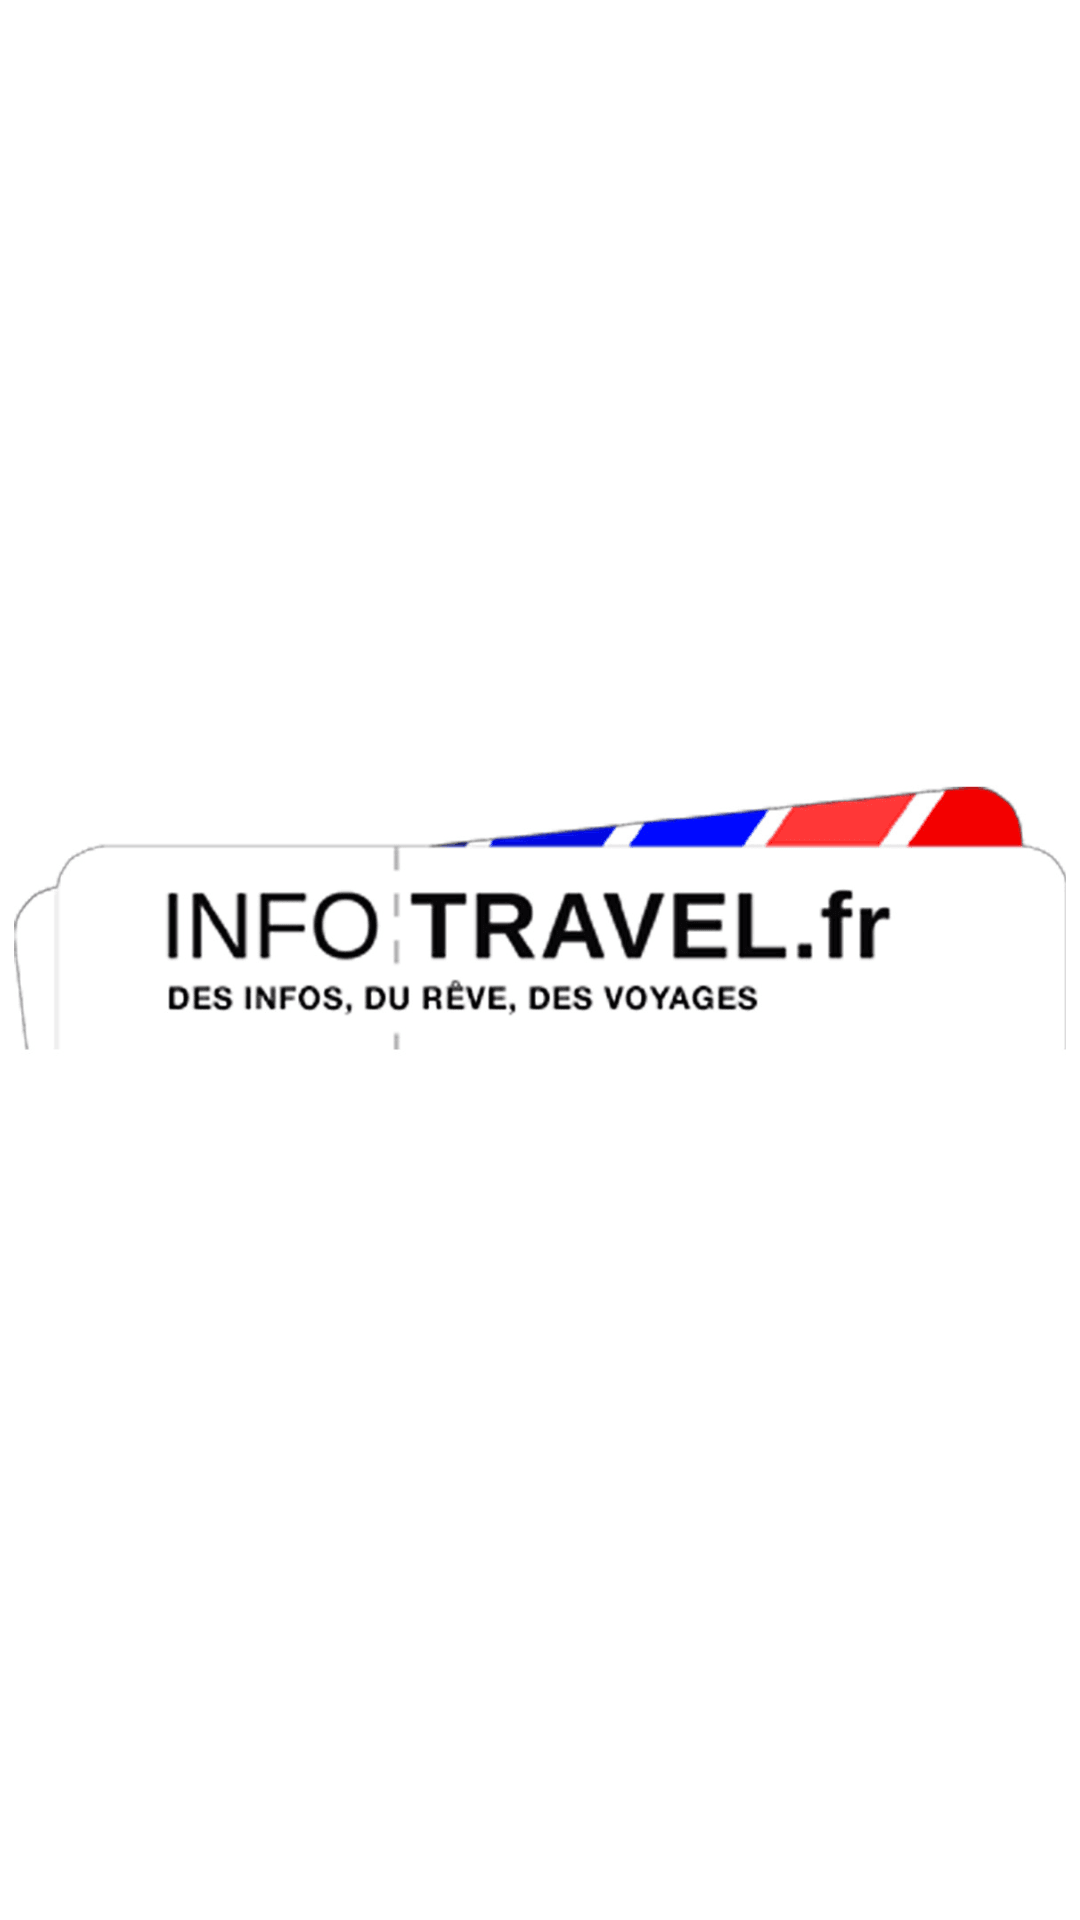 848/Infos_travel-2.png